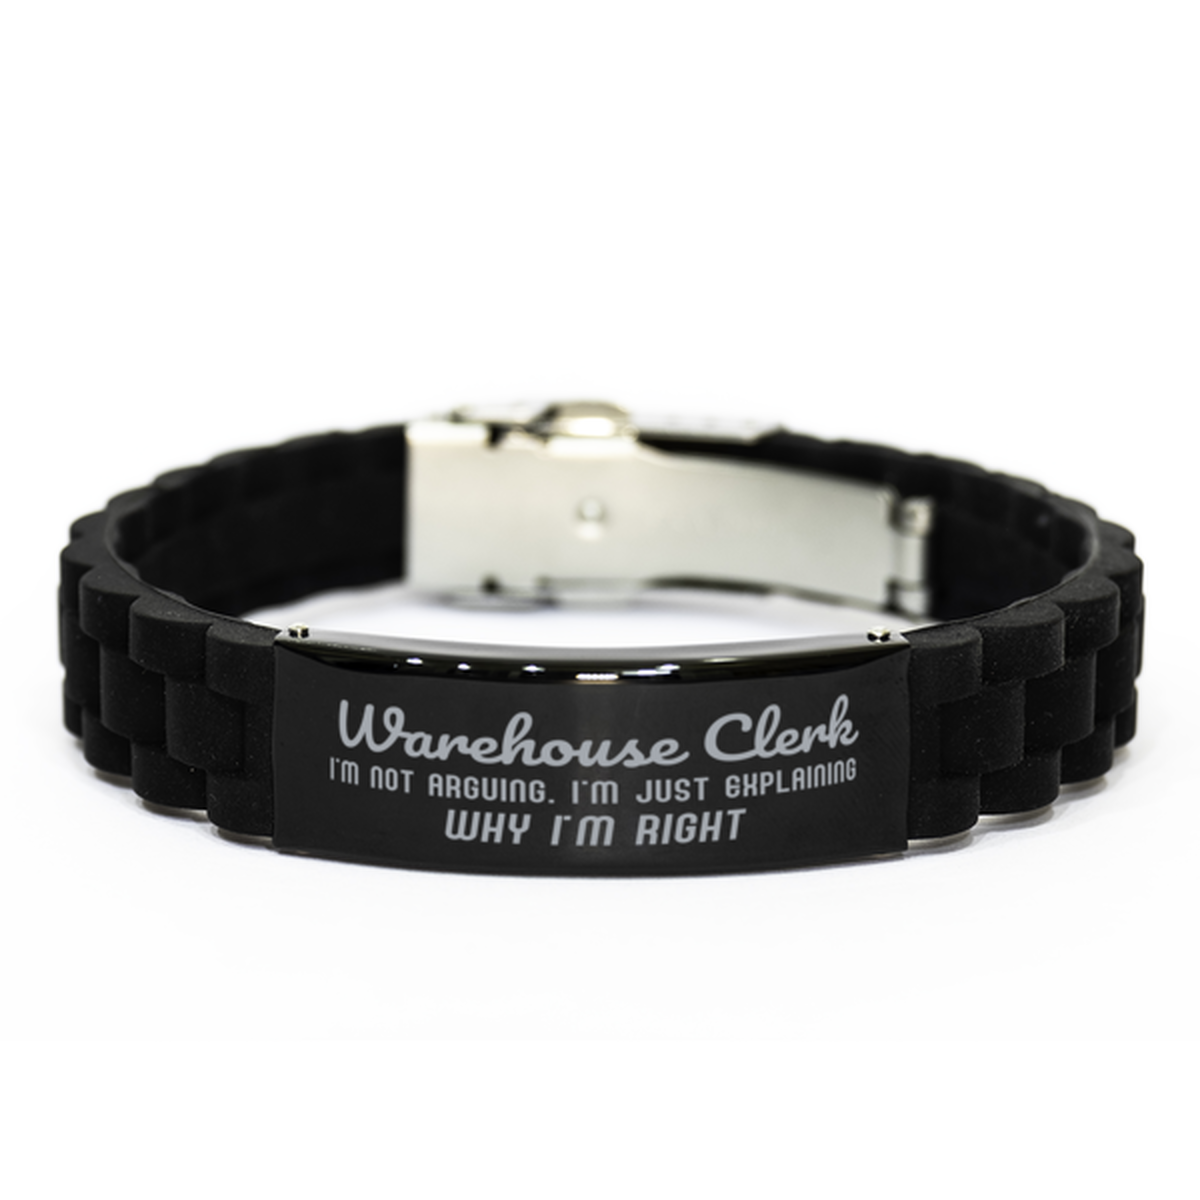 Warehouse Clerk I'm not Arguing. I'm Just Explaining Why I'm RIGHT Black Glidelock Clasp Bracelet, Funny Saying Quote Warehouse Clerk Gifts For Warehouse Clerk Graduation Birthday Christmas Gifts for Men Women Coworker